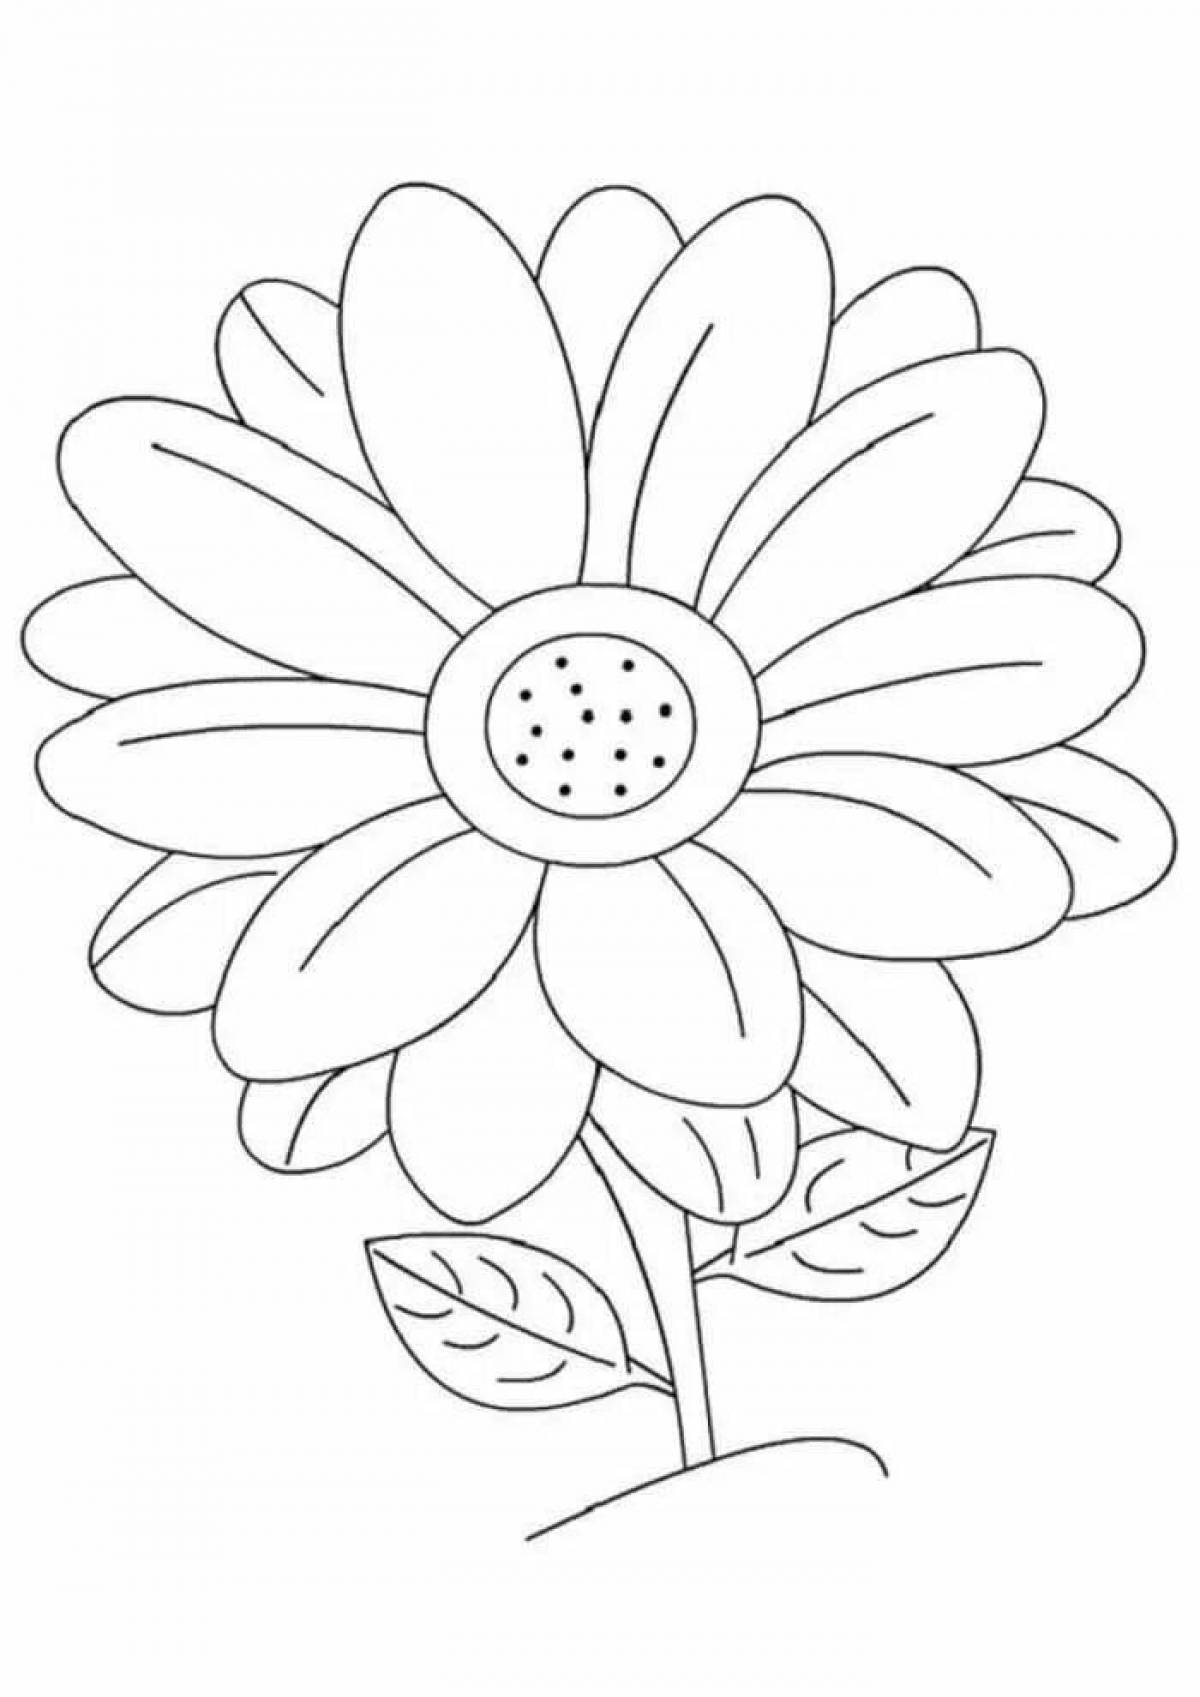 Coloring page cheerful chamomile flower